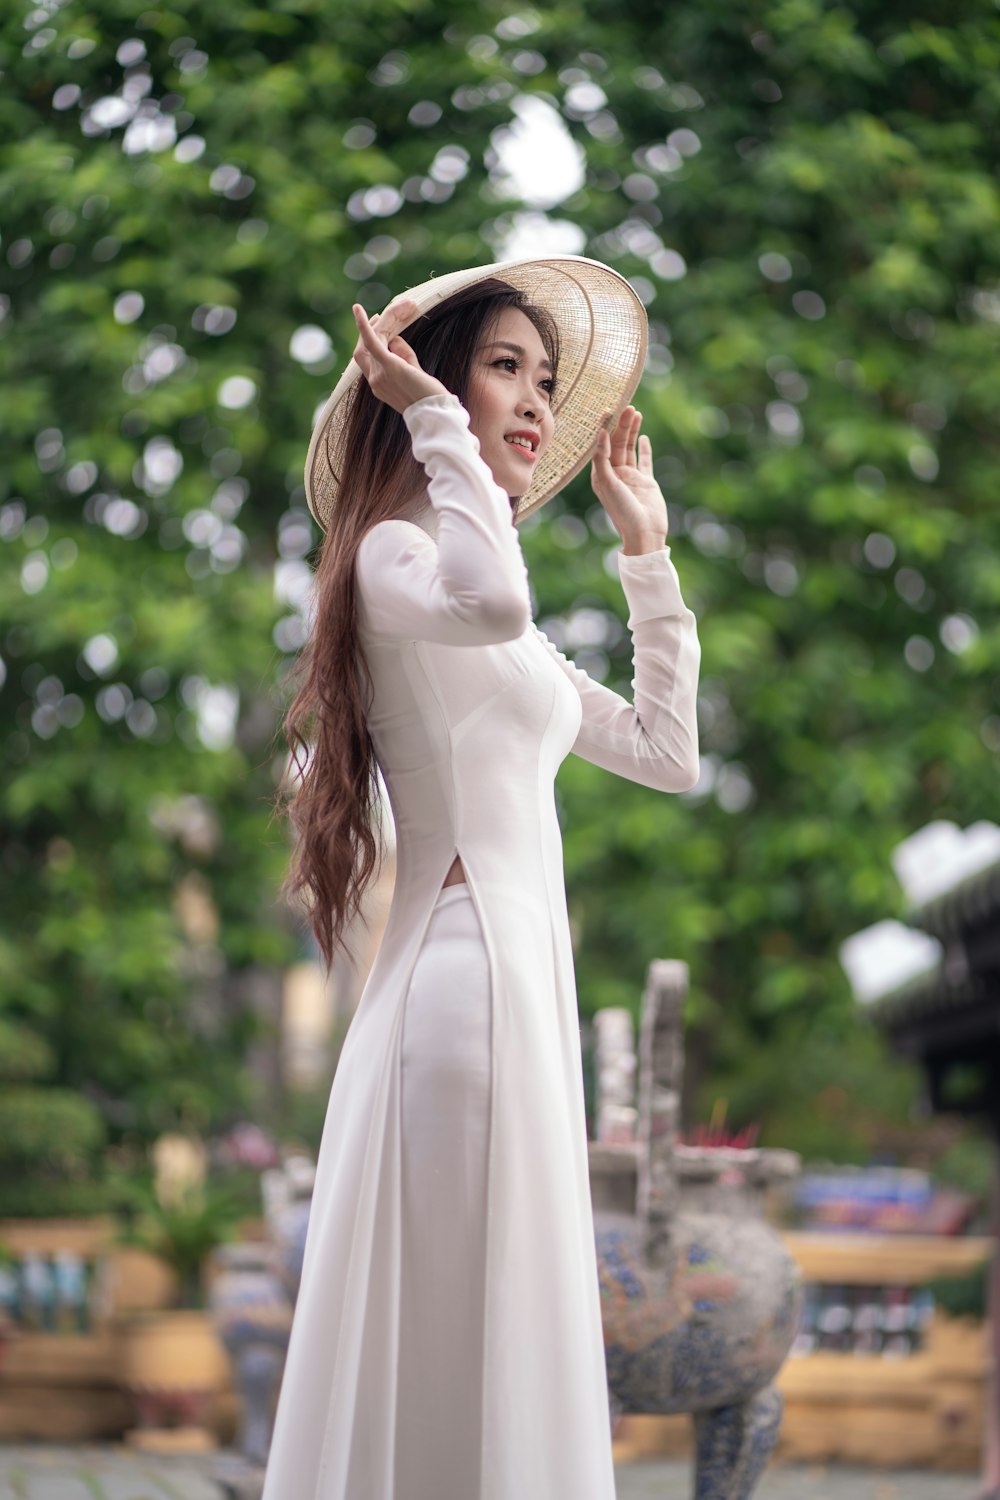 woman wearing white long-sleeved dress and beige sun hat